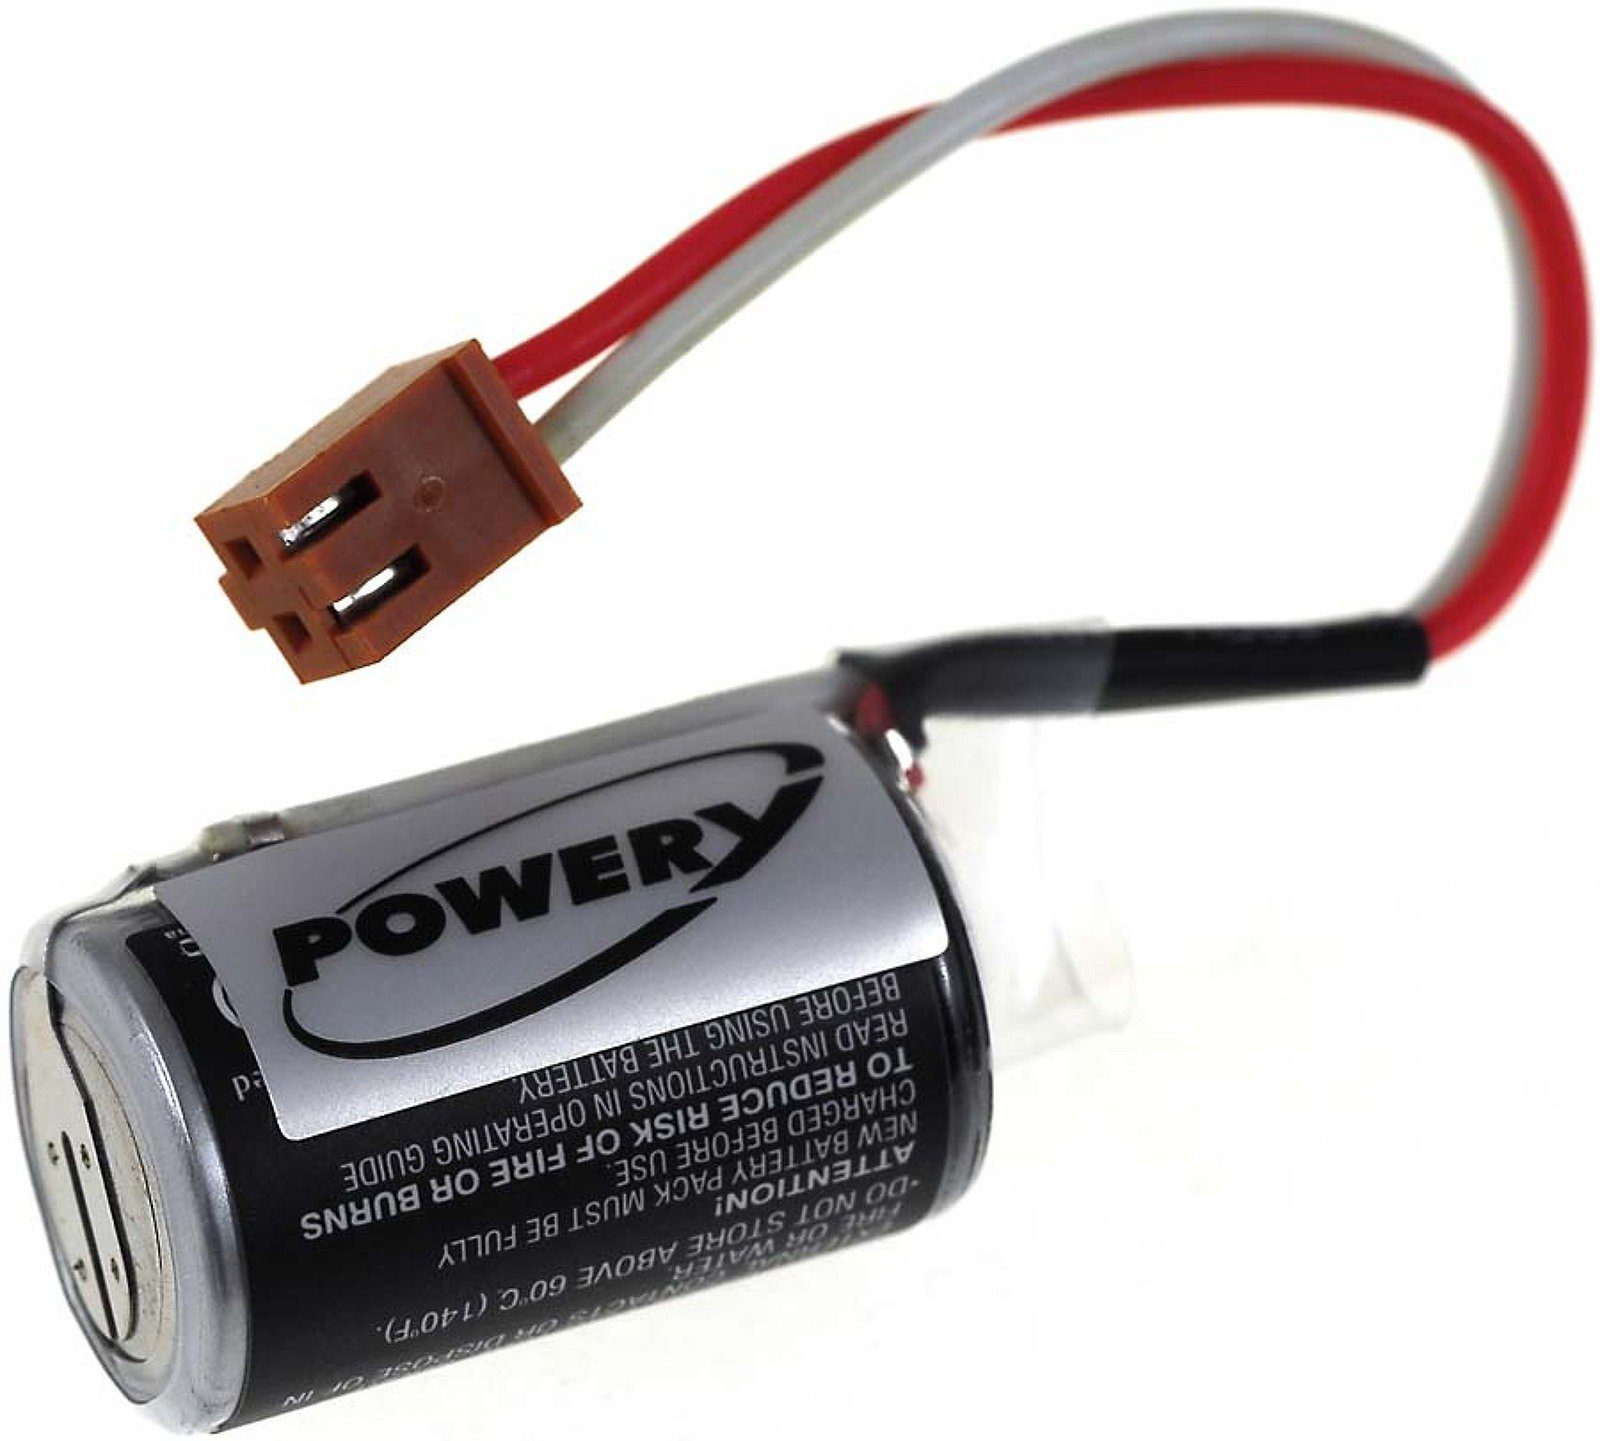 Batterie, Omron CPM2A-BAT01 Typ V) für Powery SPS-Lithiumbatterie (3.6